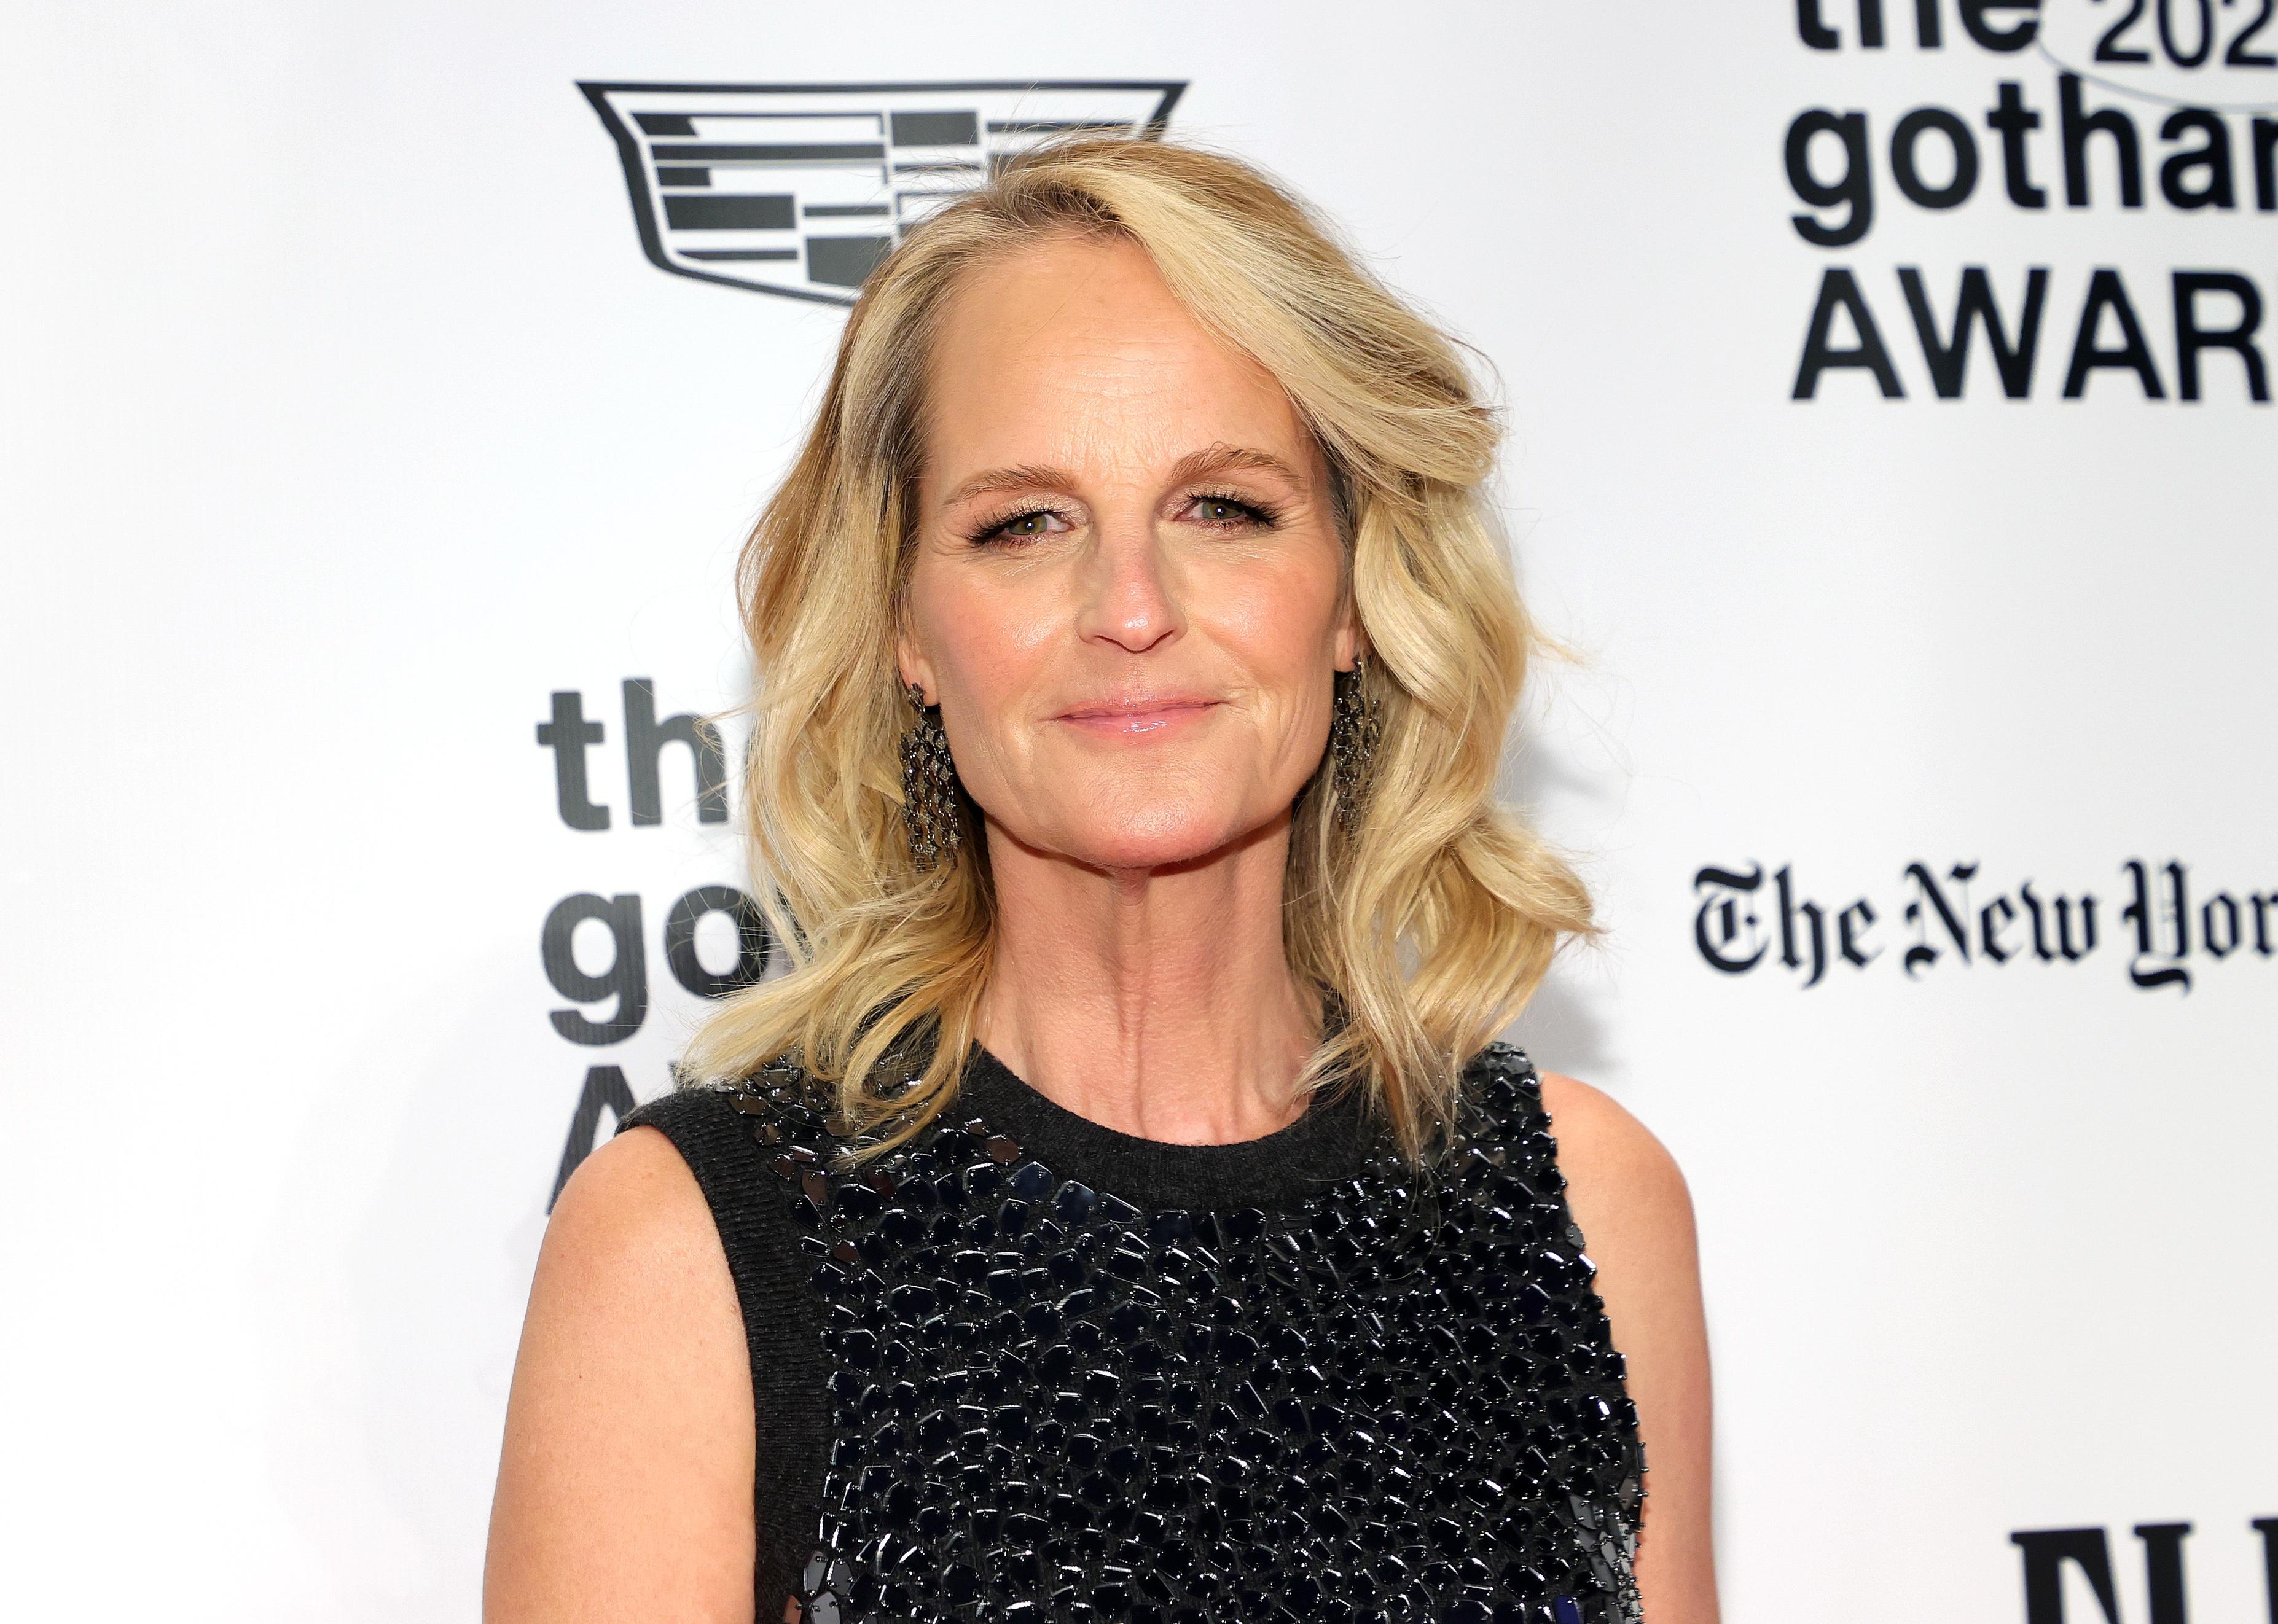 Helen Hunt in a black sparkly top.